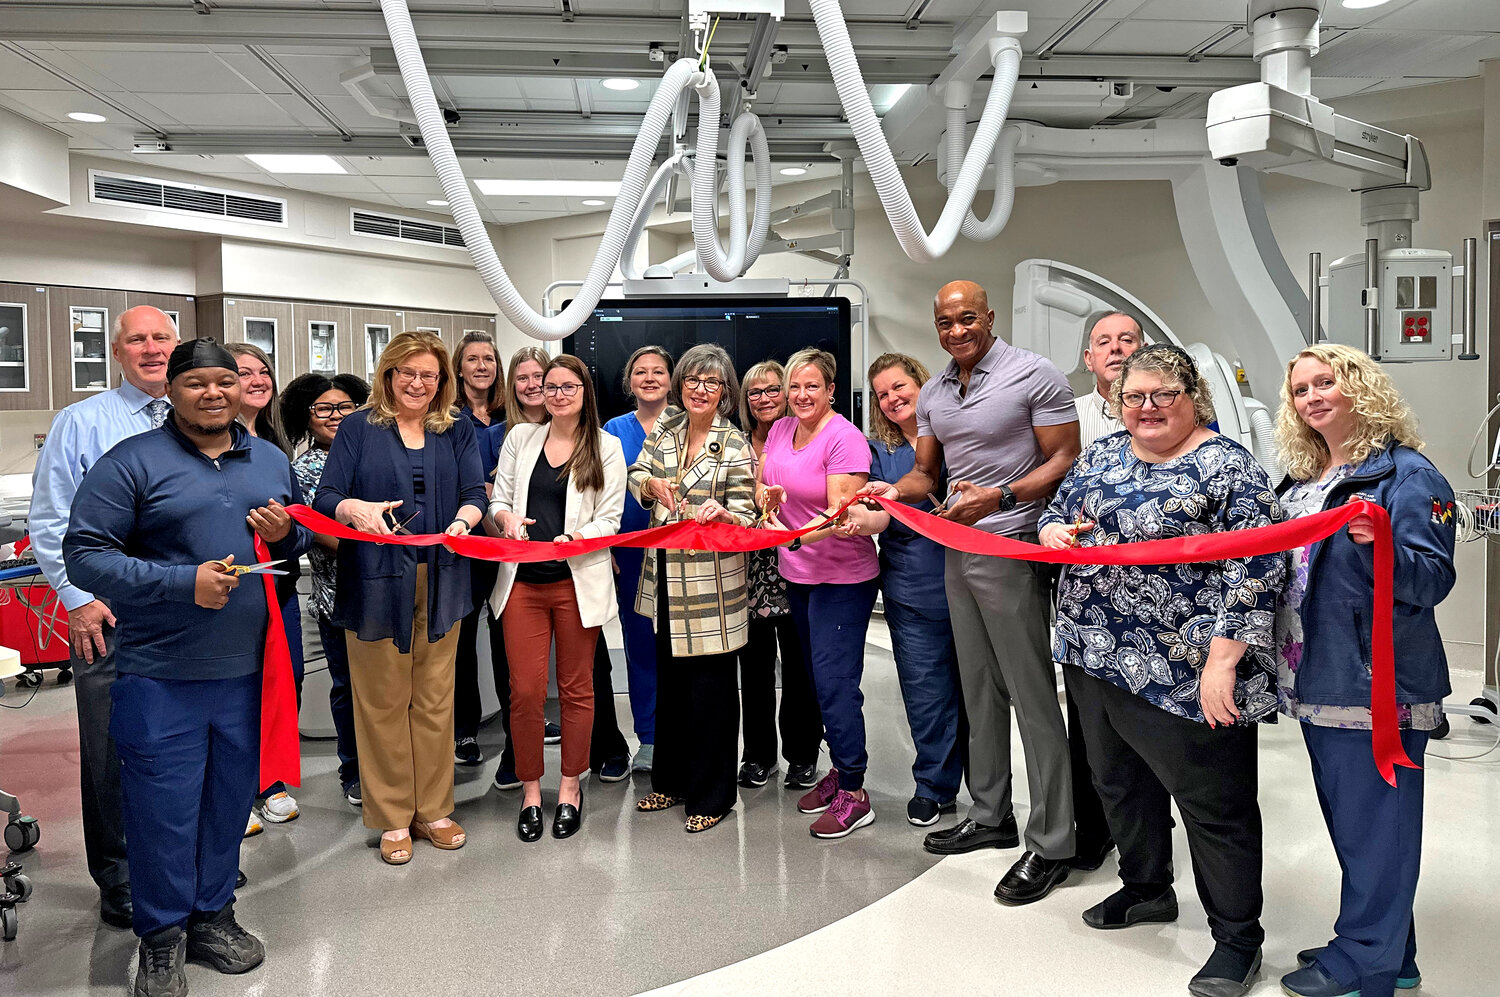 UM Shore Regional Health Radiology Services team members held a ribbon-cutting ceremony for the new Interventional Radiology Suite at UM Shore Medical Center at Easton on Oct. 17.